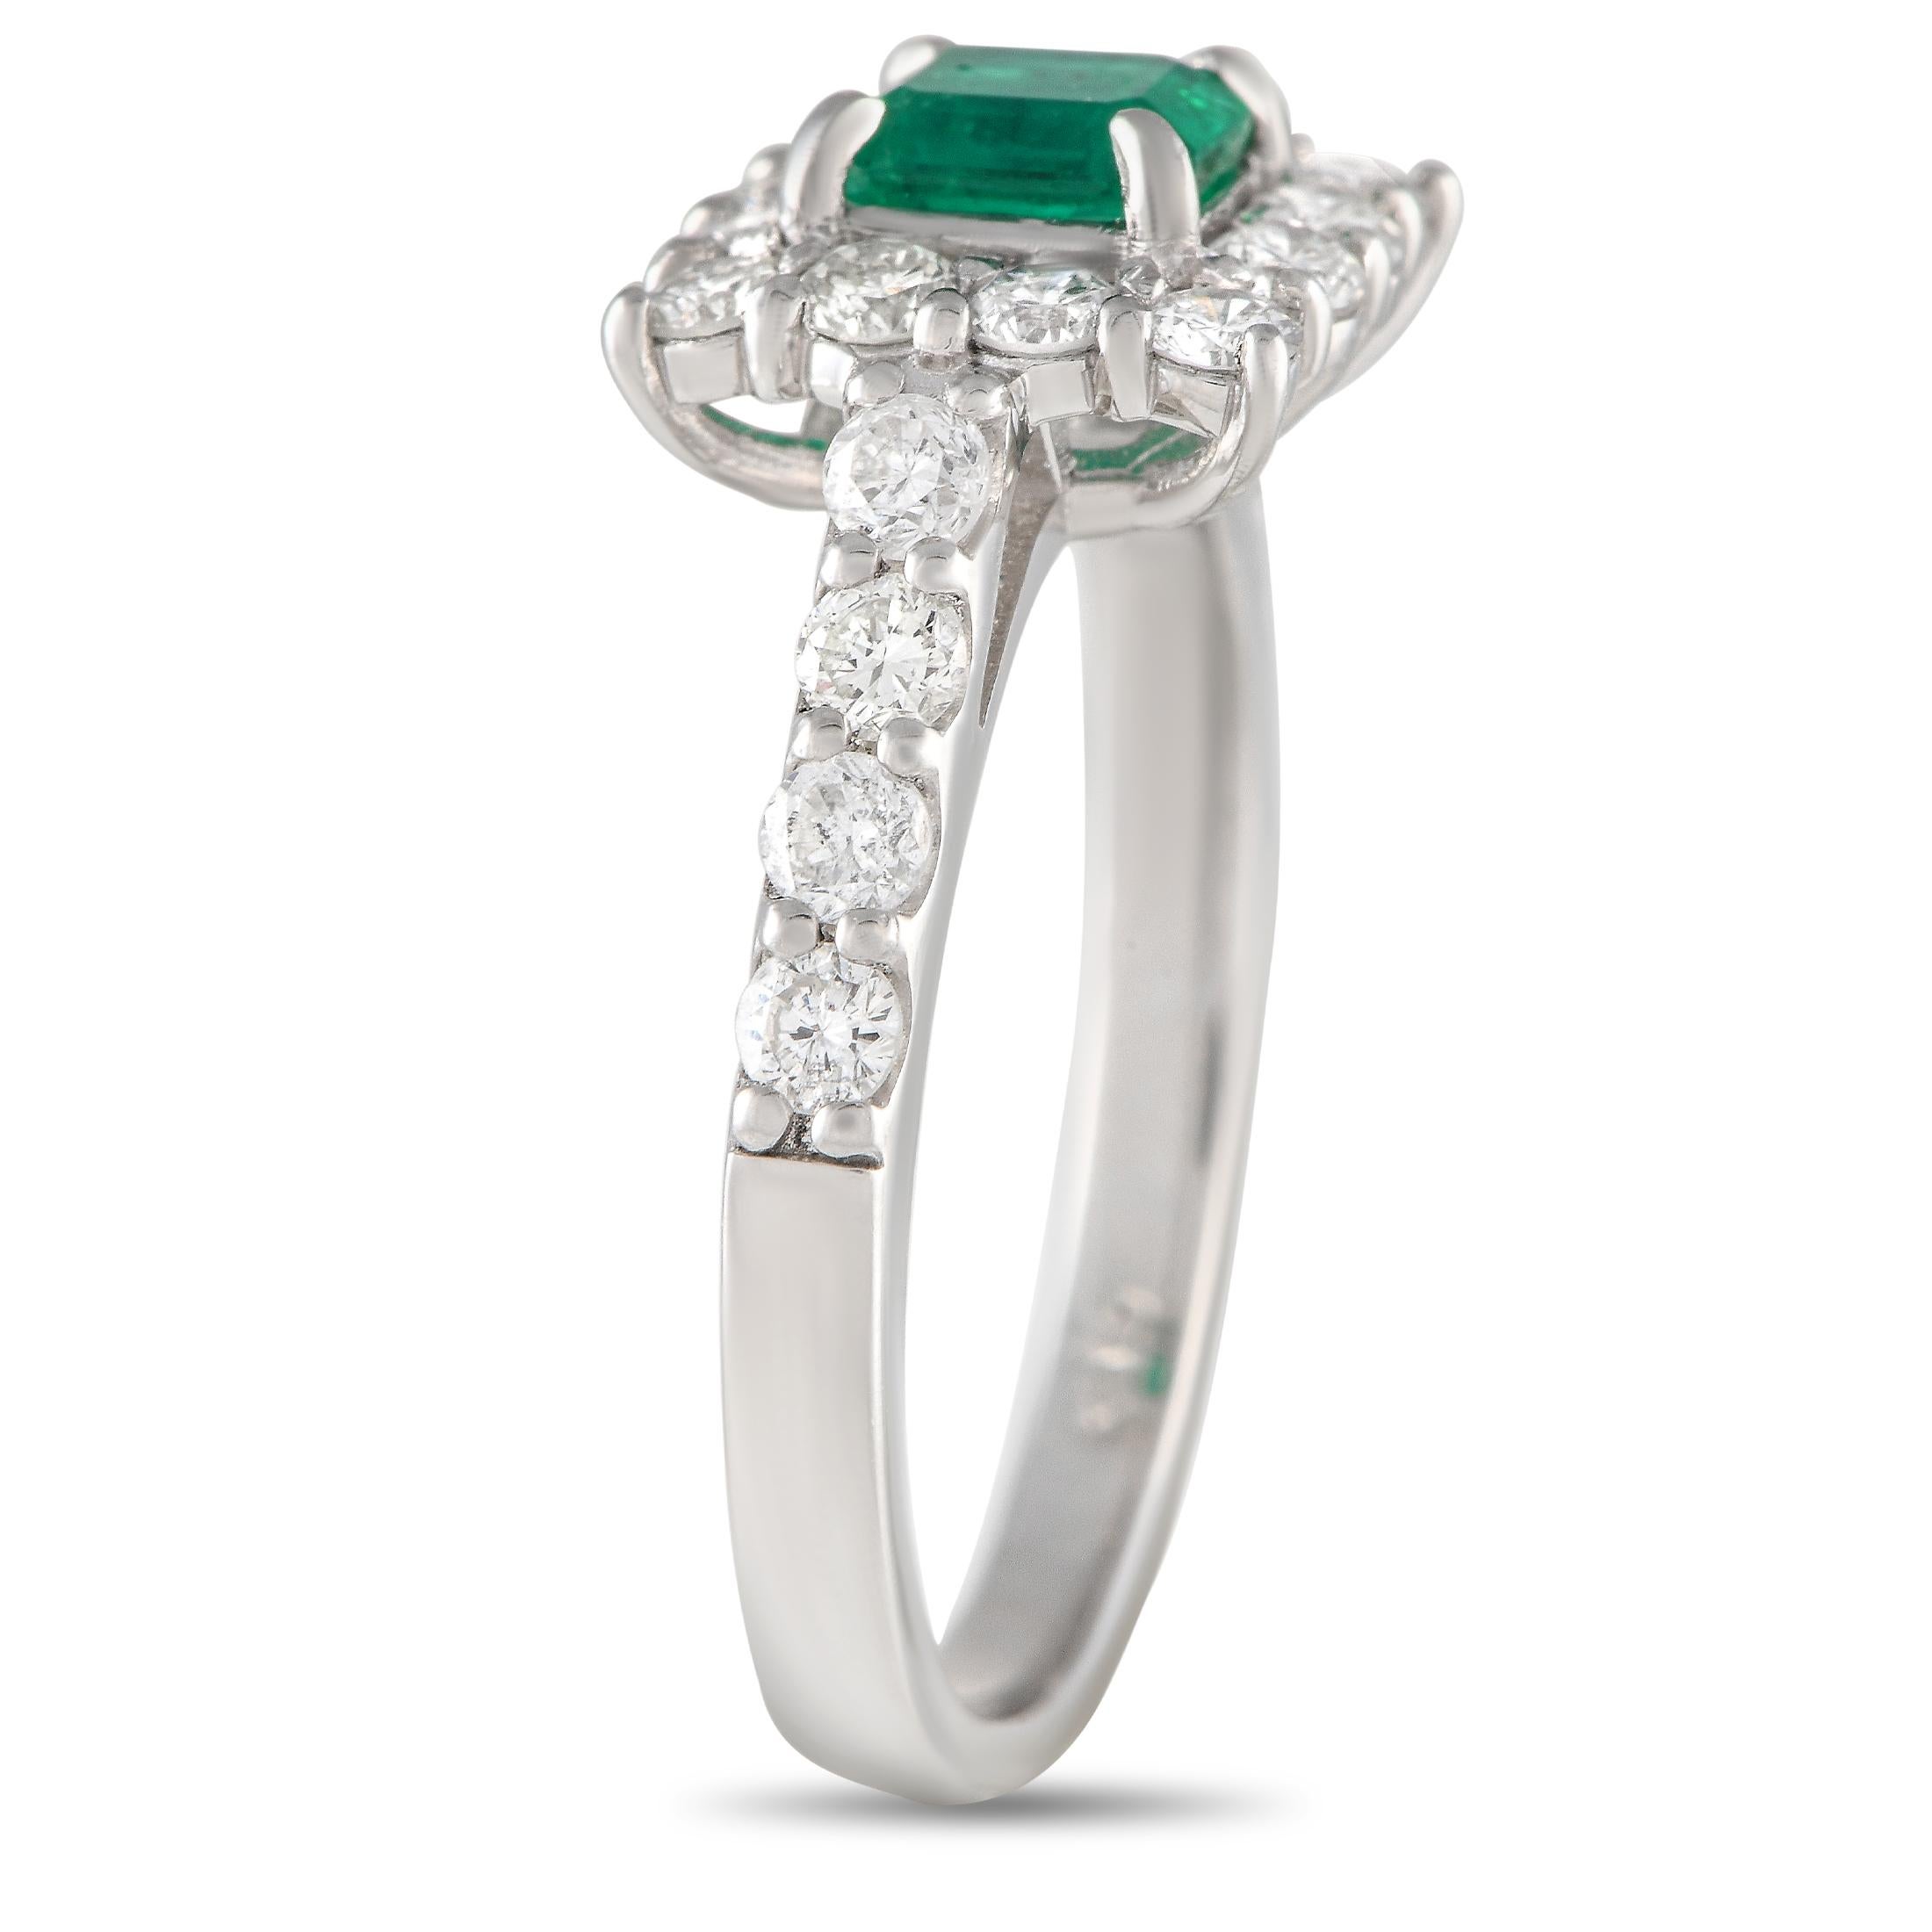 A 0.54 carat emerald center stone adds a pop of color to this impressive luxury ring. Elevated by sparkling diamonds totaling 0.82 carats, this pieces platinum setting features a 2mm wide band and a top height measuring 5mm.This jewelry piece is